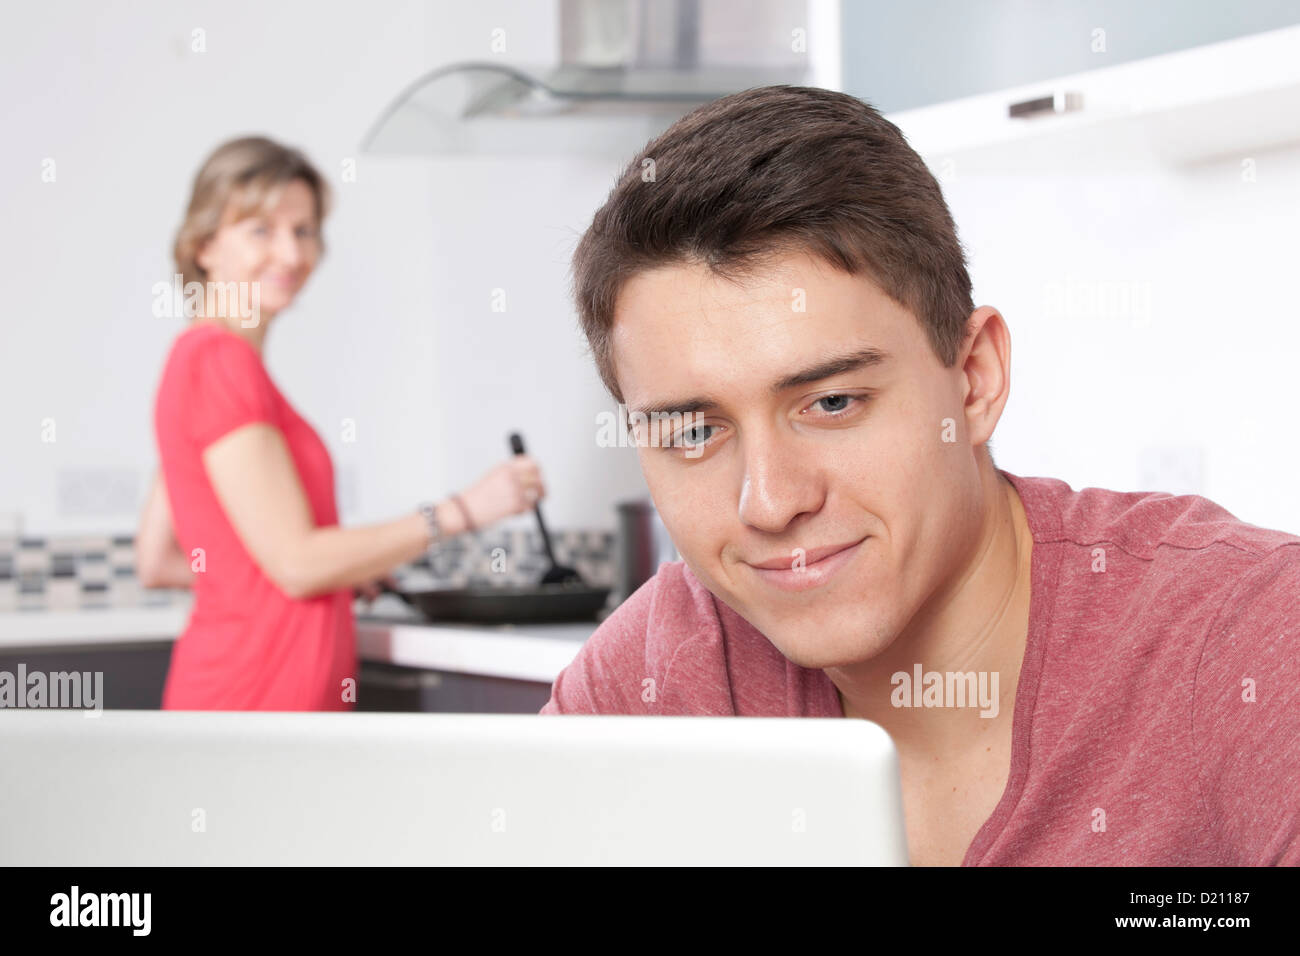 Young male using a laptop, a woman is in the background cooking. Stock Photo